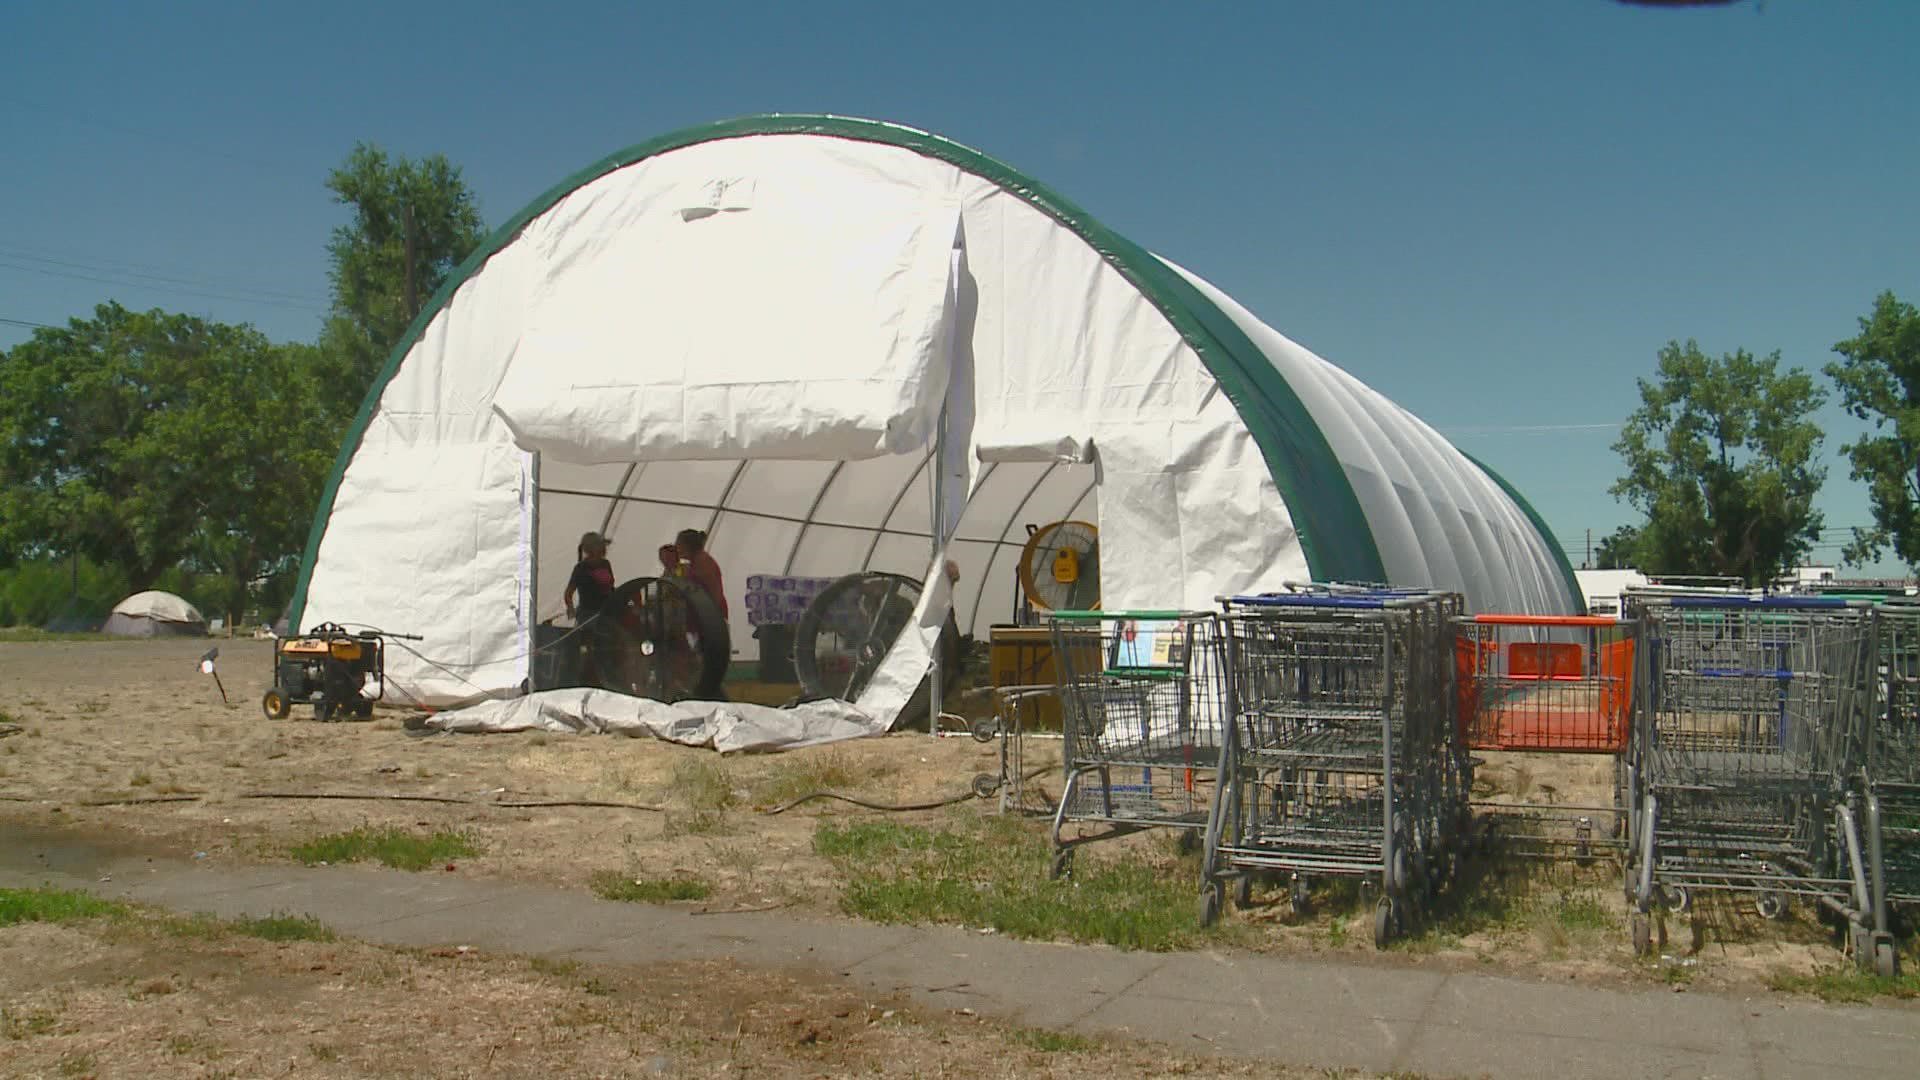 WSDOT is aware of the tent. While it doesn't allow camping on its land, officials say they don't want someone to have a medical emergency on their property.